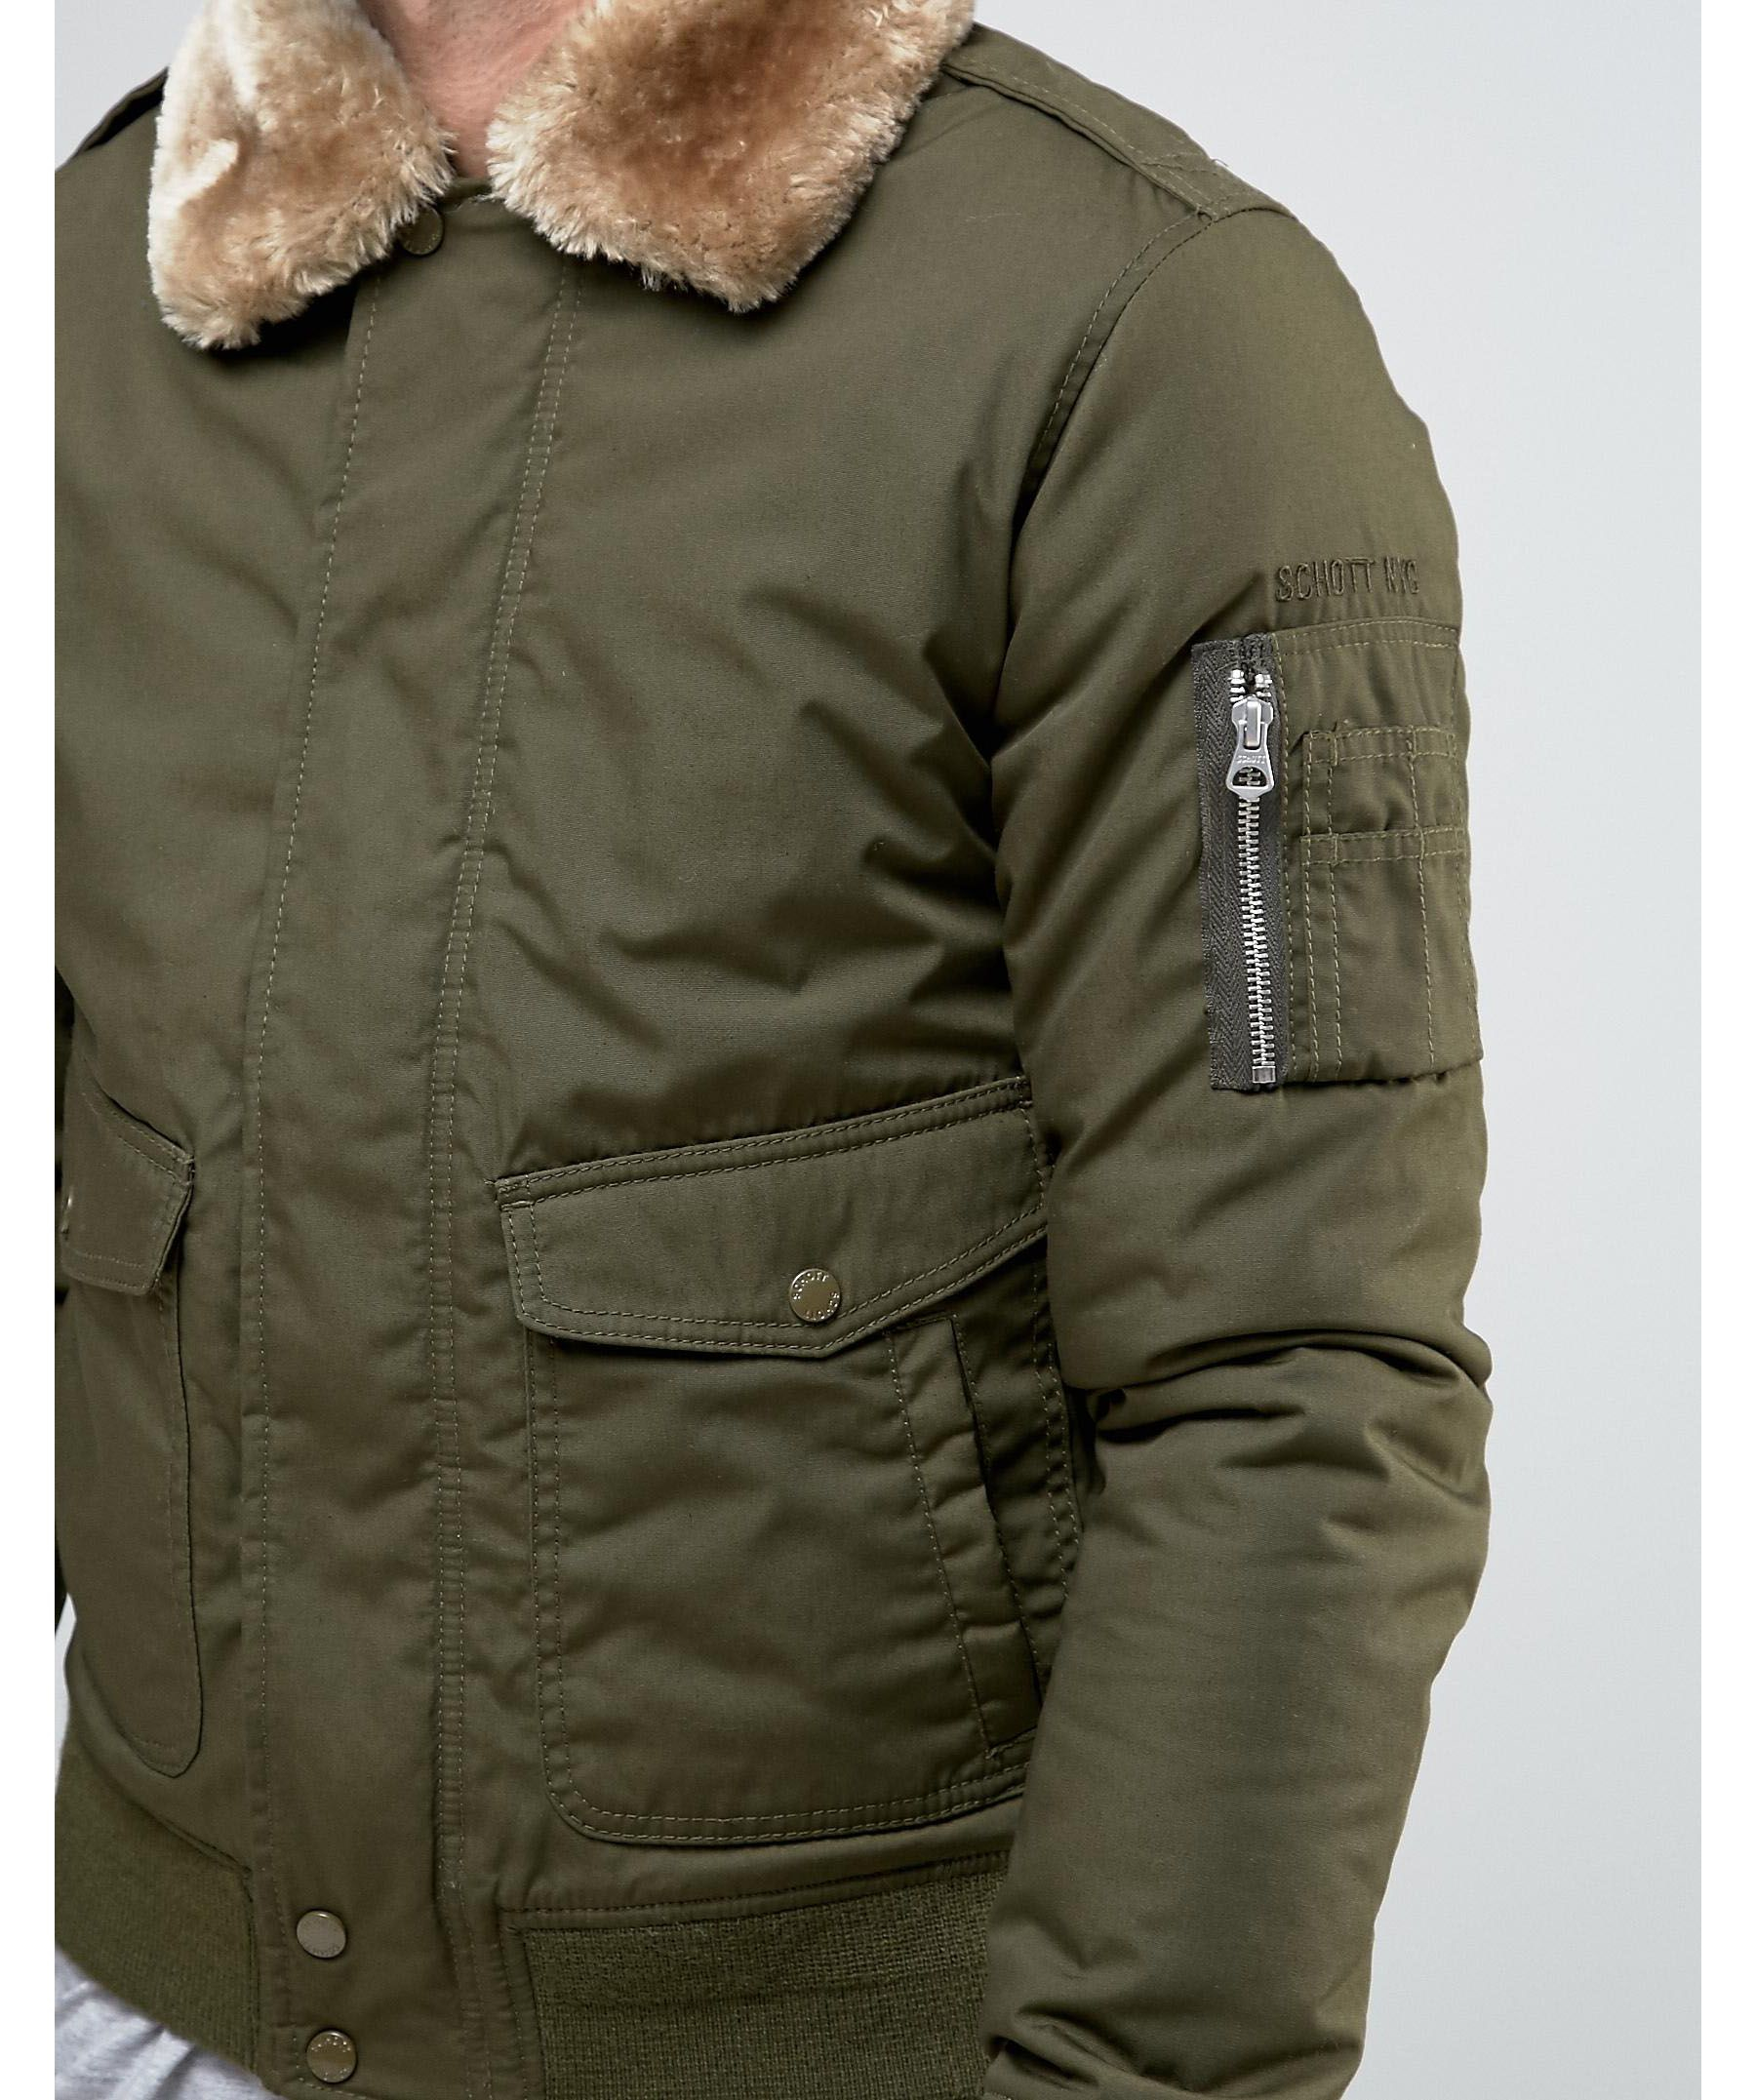 Lyst - Schott Nyc Air Bomber Jacket Faux Fur Collar in Green for Men